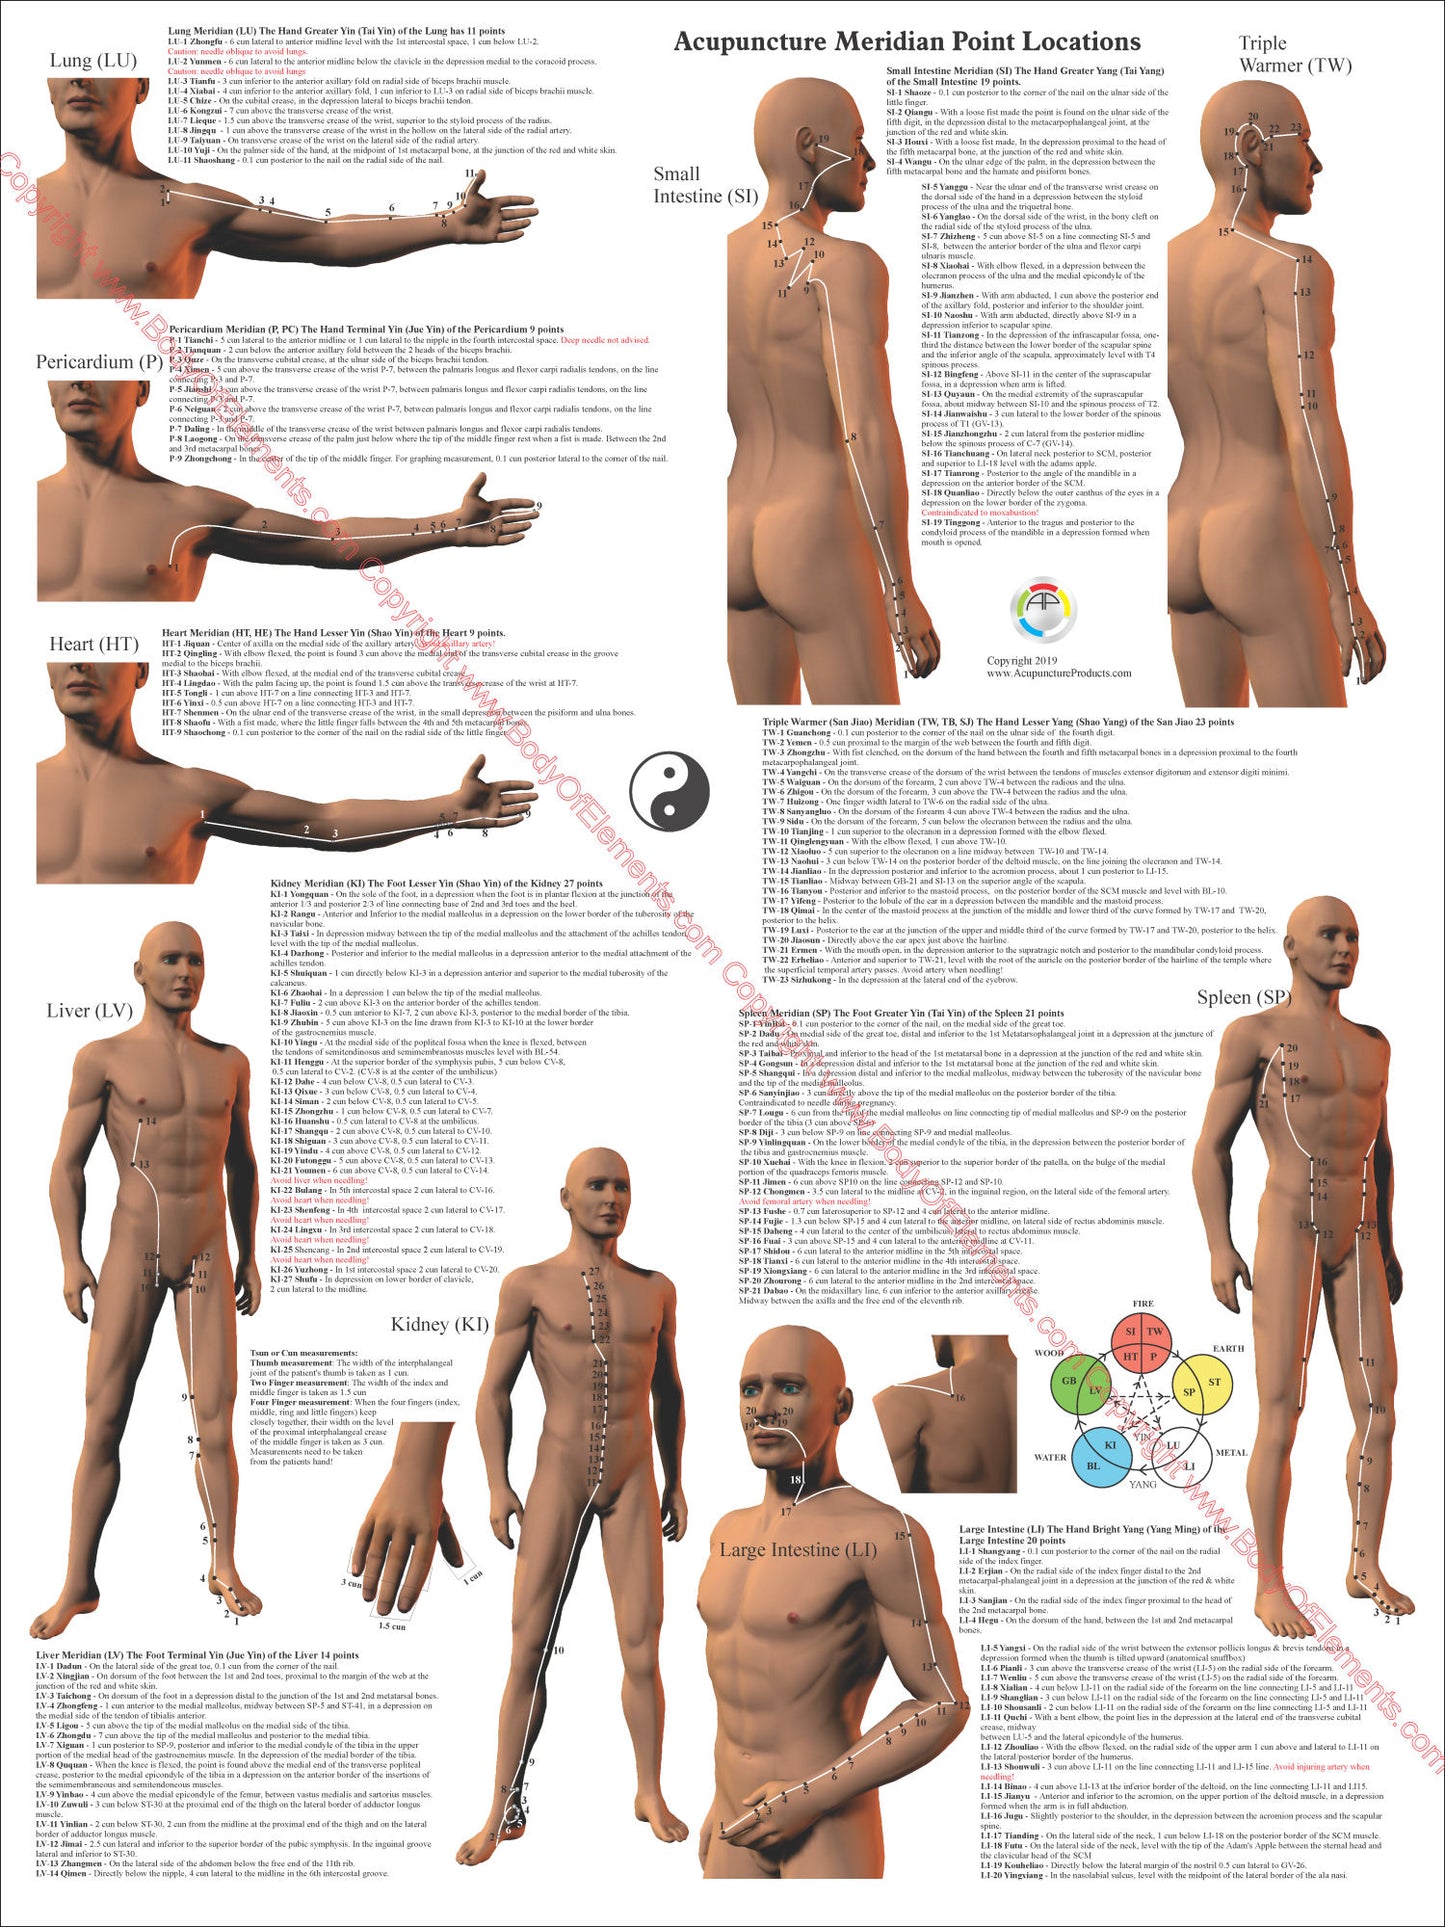 Point locations for the acupuncture meridians